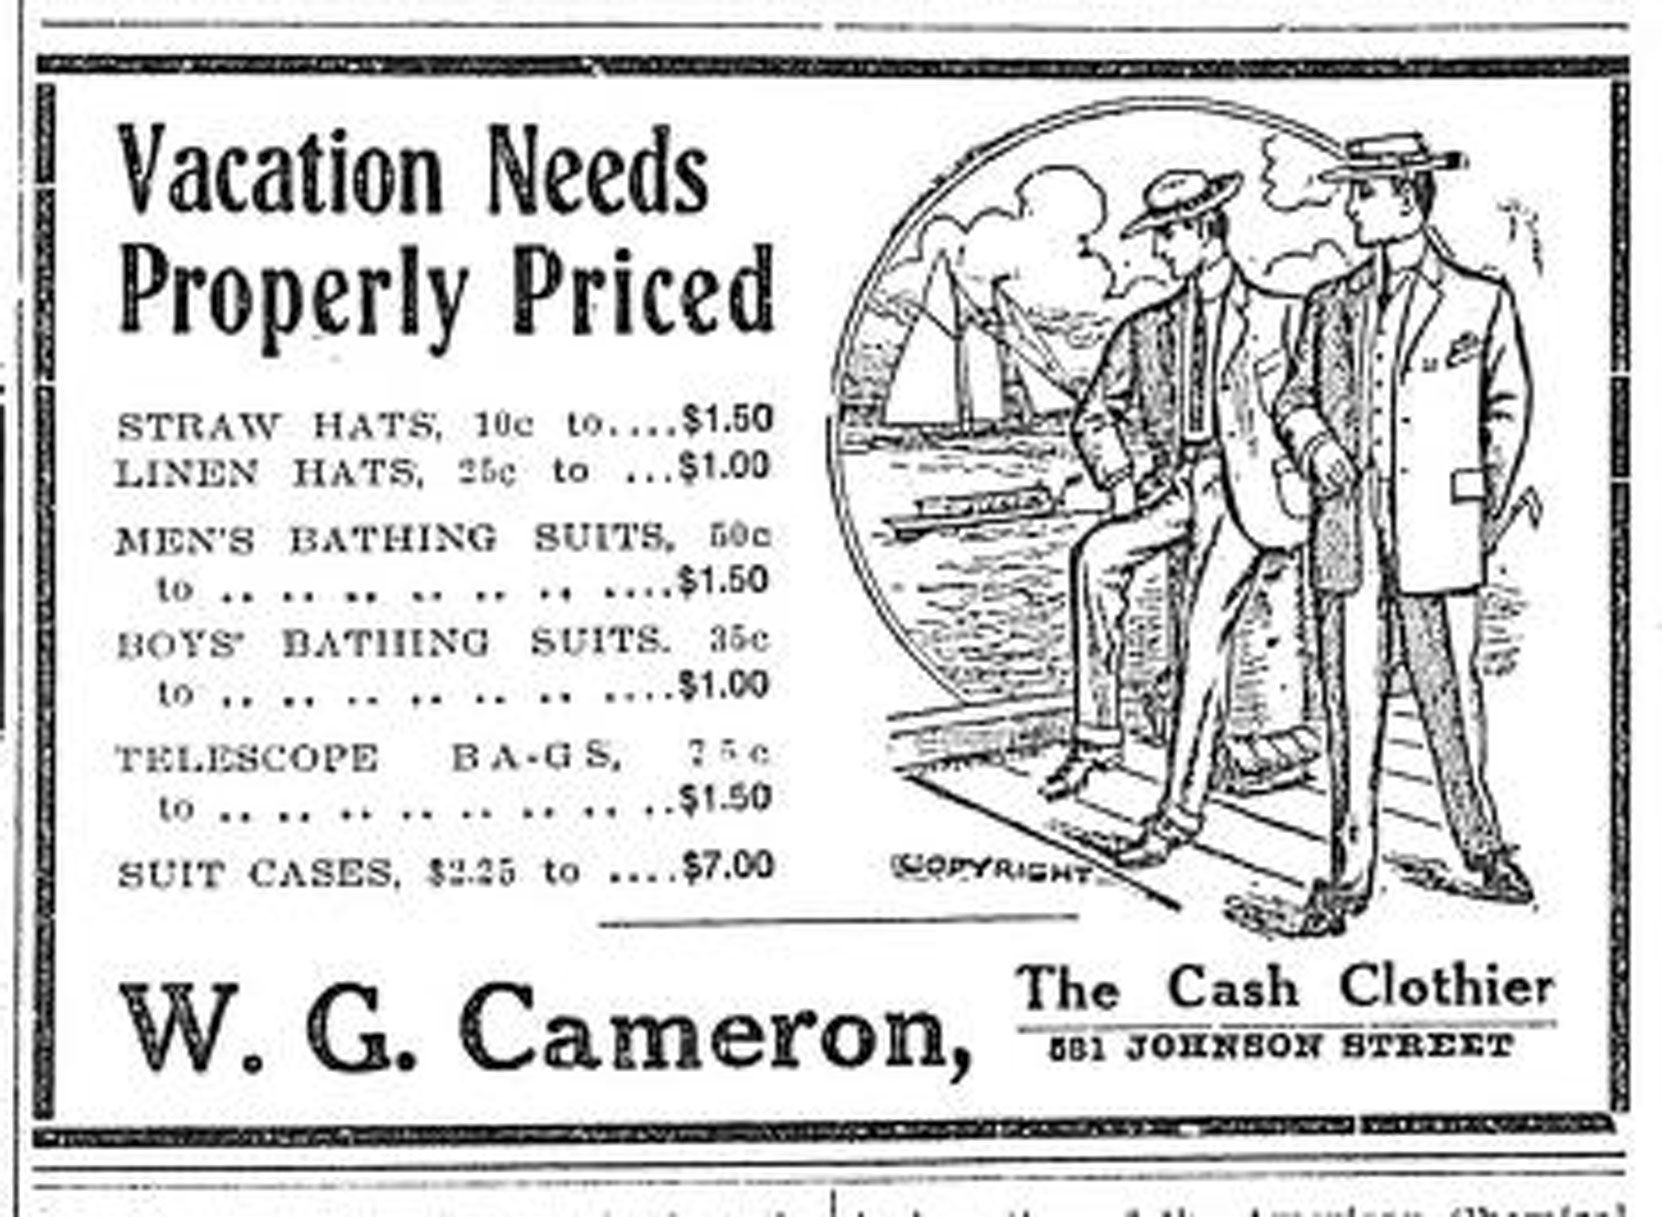 1909 advertisement for W.G. Cameron, 581 Johnson Street, (Victoria Online Sightseeing Tours collection)